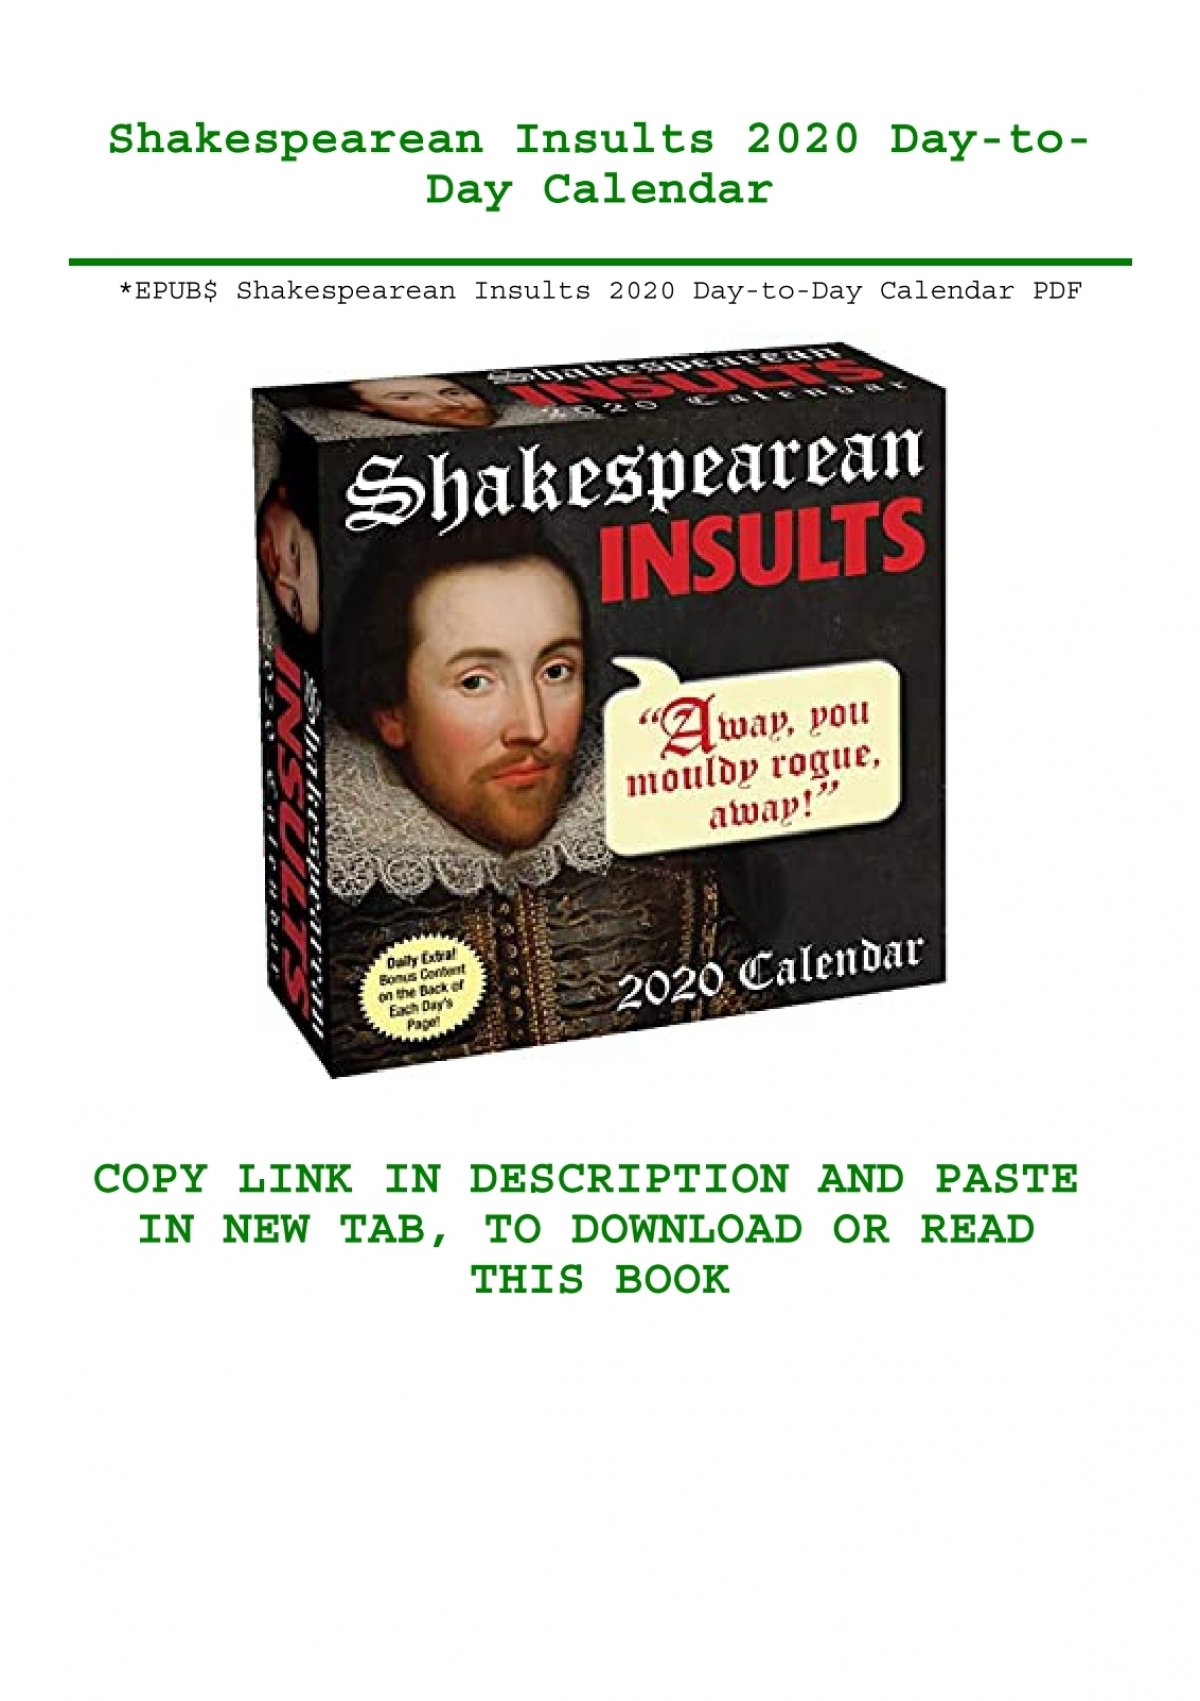 EPUB$ Shakespearean Insults 2020 Day to Day Calendar PDF